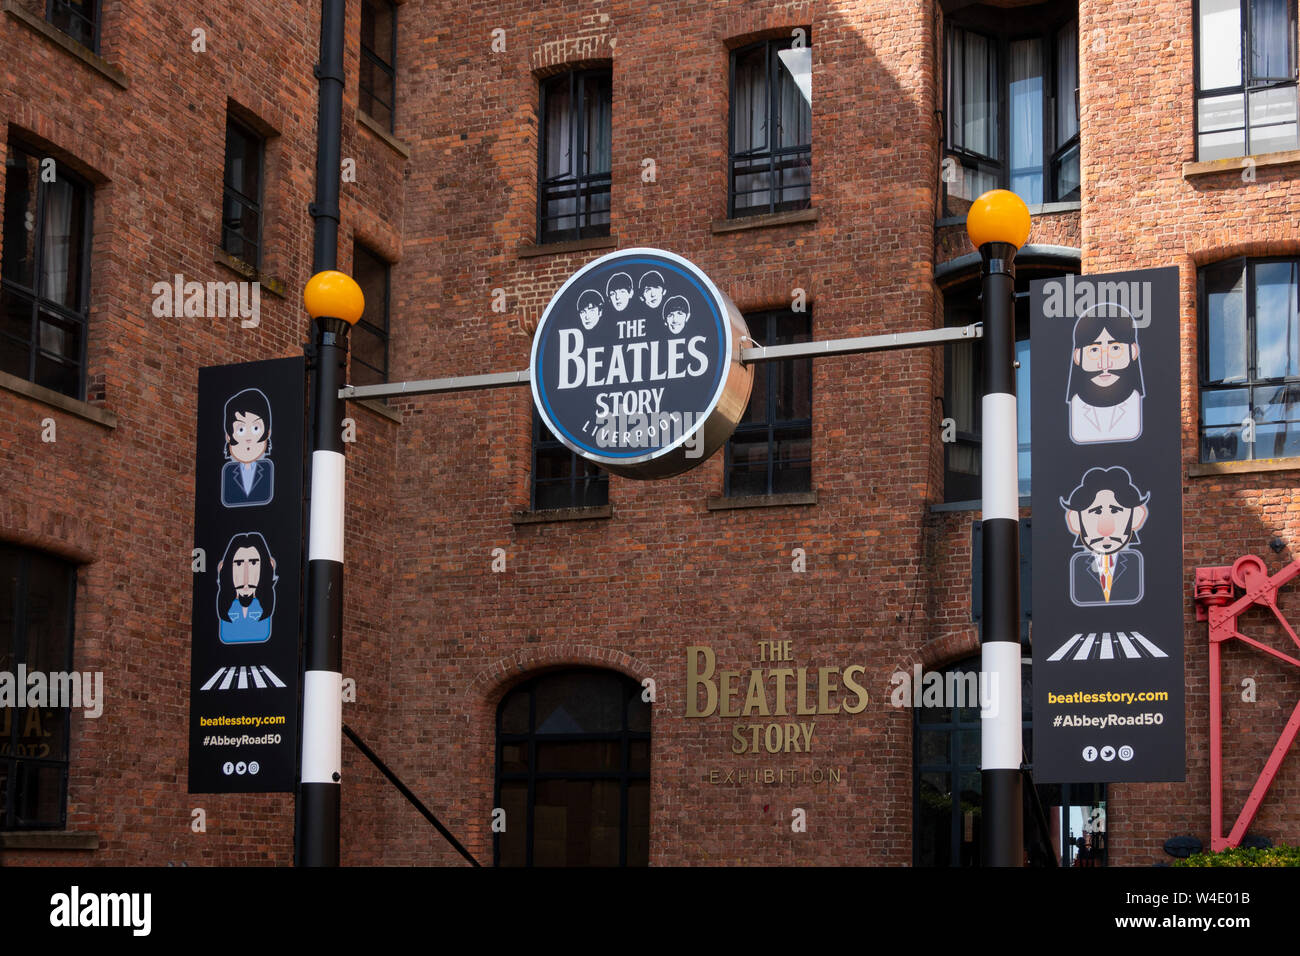 The Beatles Story, an entertainment in Liverpool, England Stock Photo